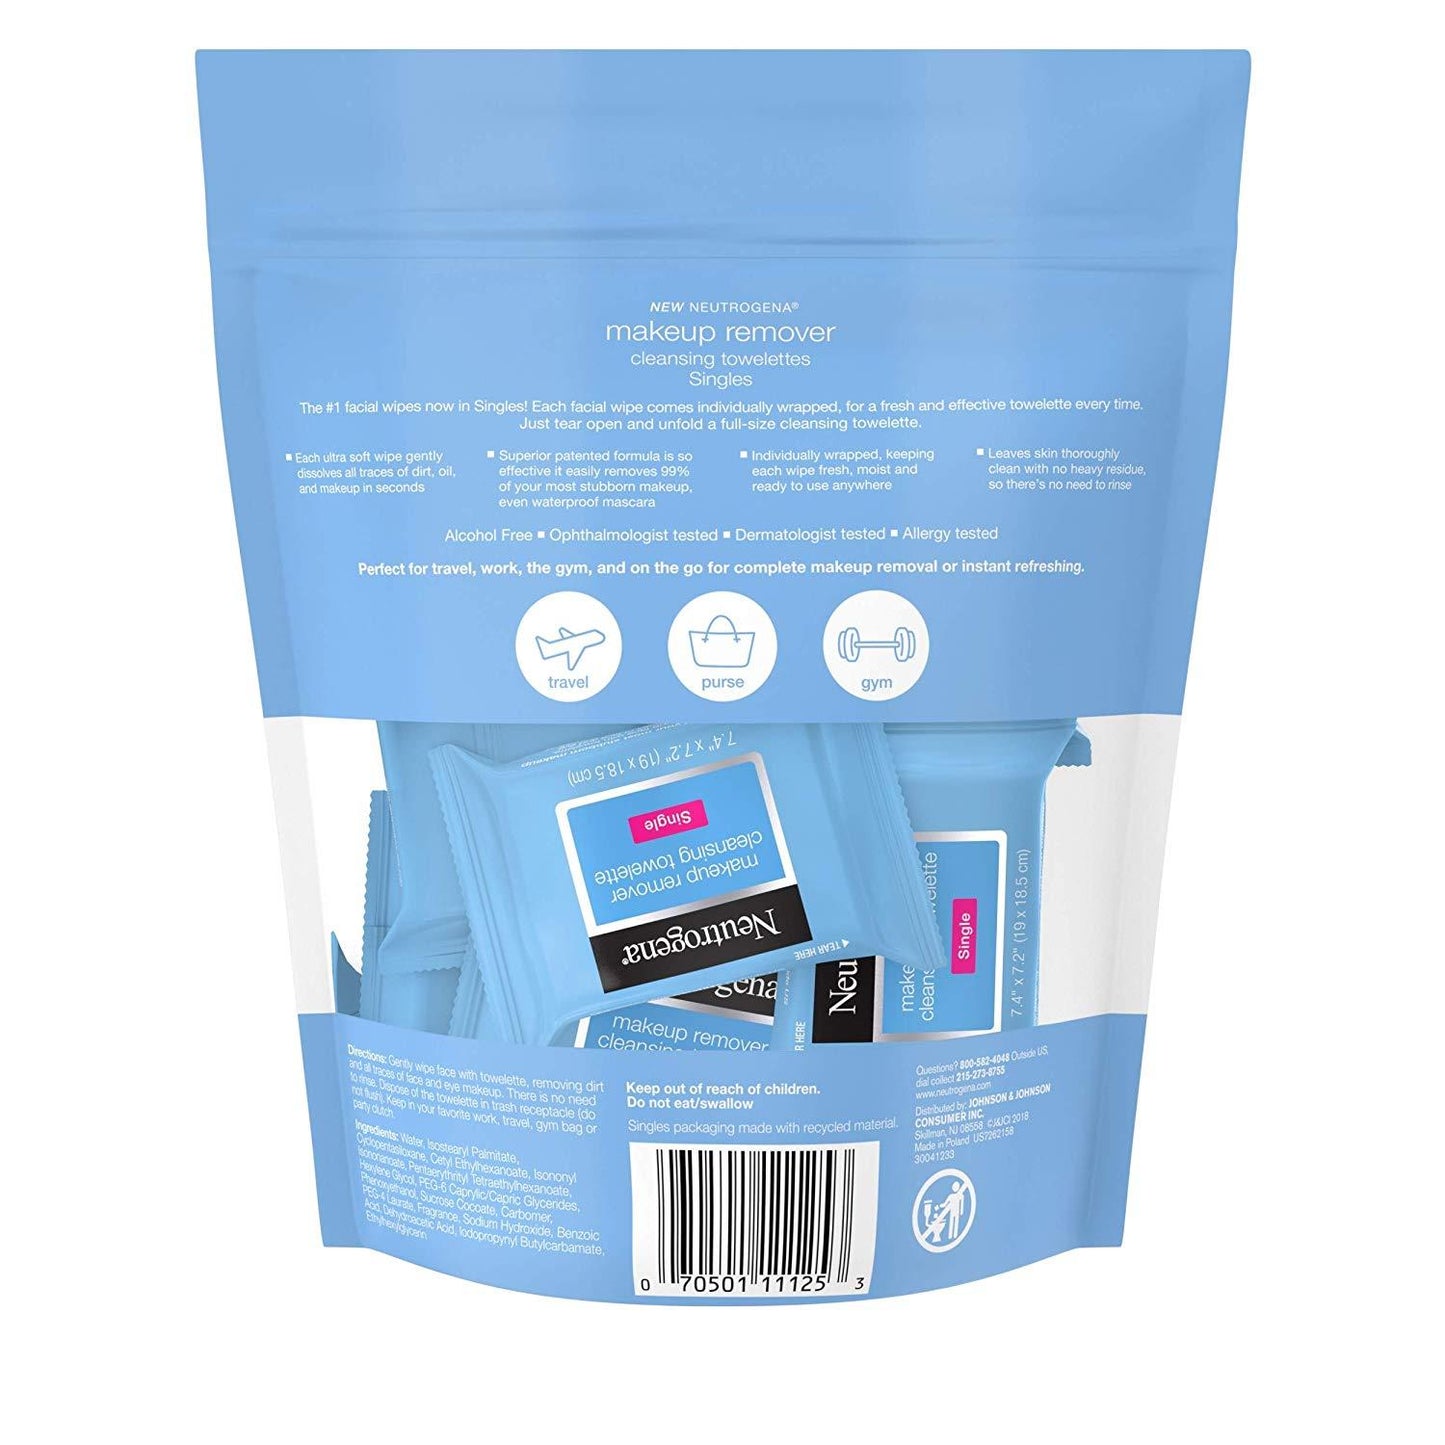 Neutrogena Makeup Remover Cleansing Towelette Singles, Daily Face Wipes To Remove Dirt, Oil, Makeup & Waterproof Mascara, Individually Wrapped, 20 Ct